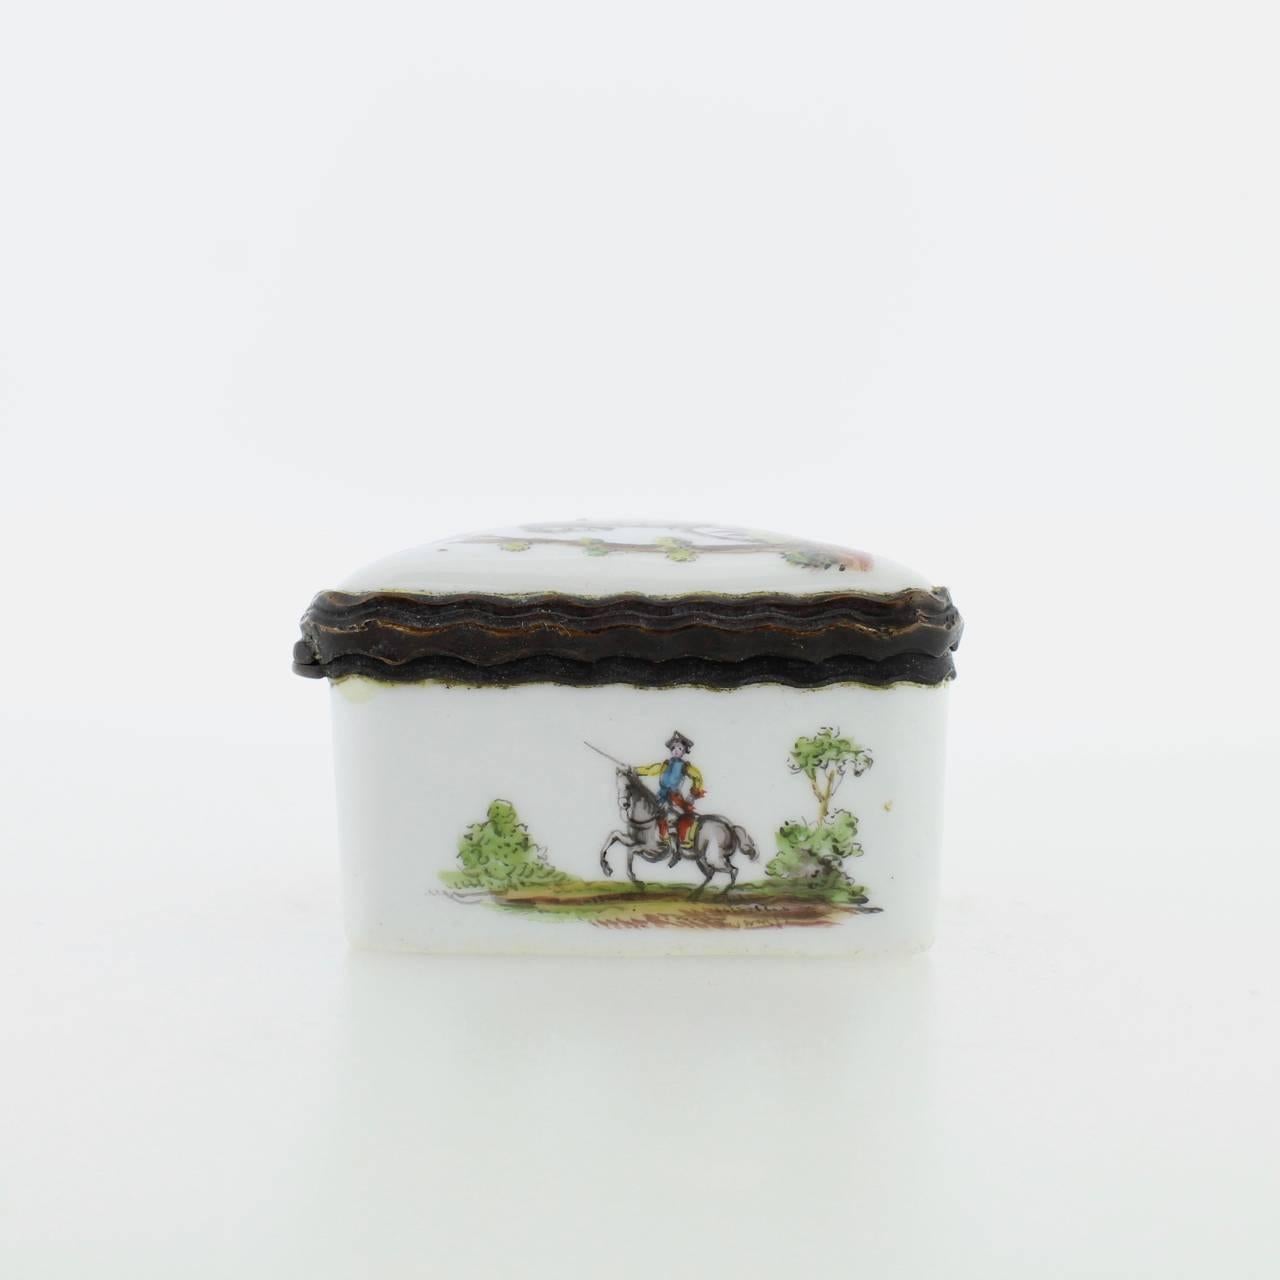 Antique French or German Porcelain Snuff Box with Hand-Painted Military Scenes For Sale 4